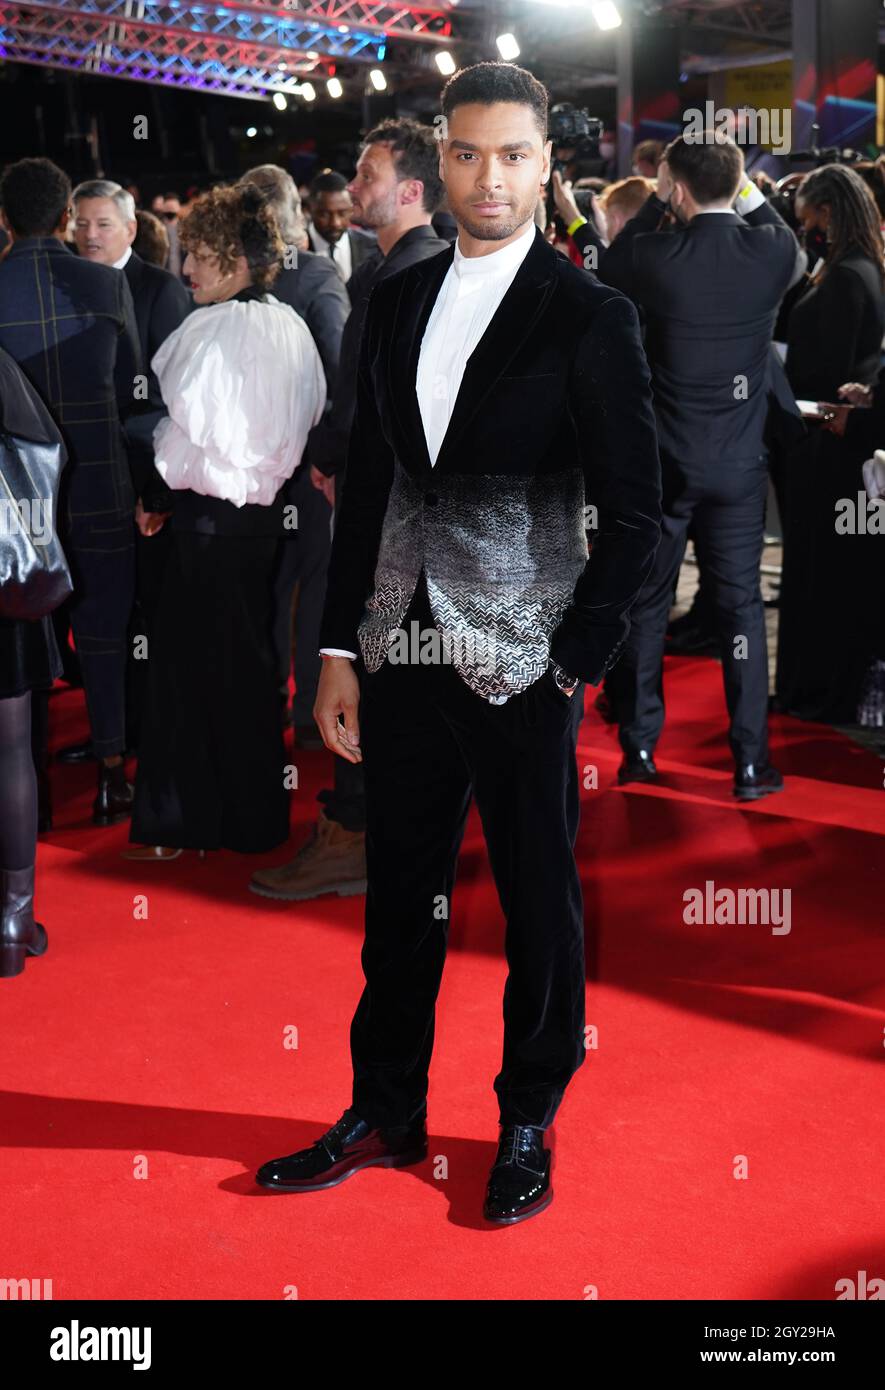 Rege-Jean Page arrives for The Harder They Fall world premiere at the Royal Festival Hall in London during the BFI London Film Festival. Picture date: Wednesday October 6, 2021. Stock Photo